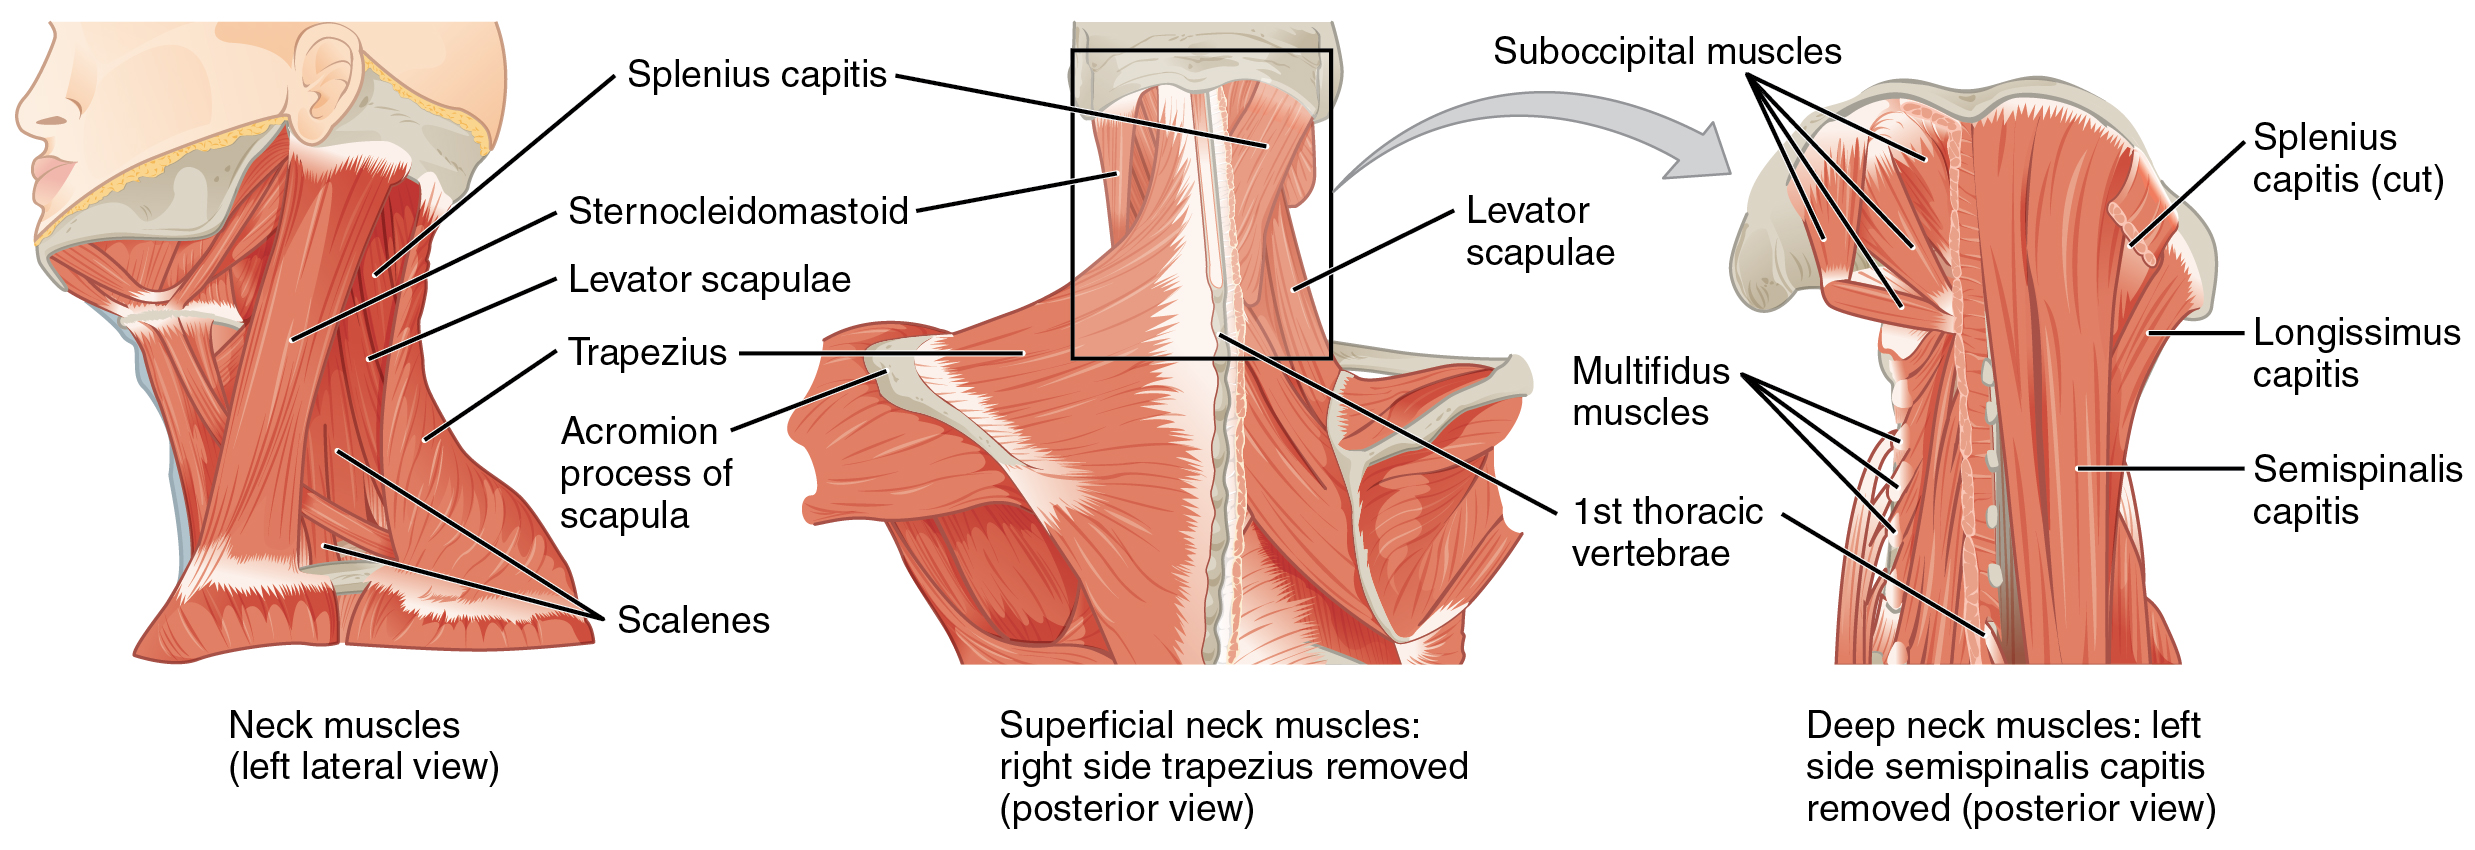 Lateral and posterior views of superficial muscles of the neck; posterior view of deep muscles of the neck.